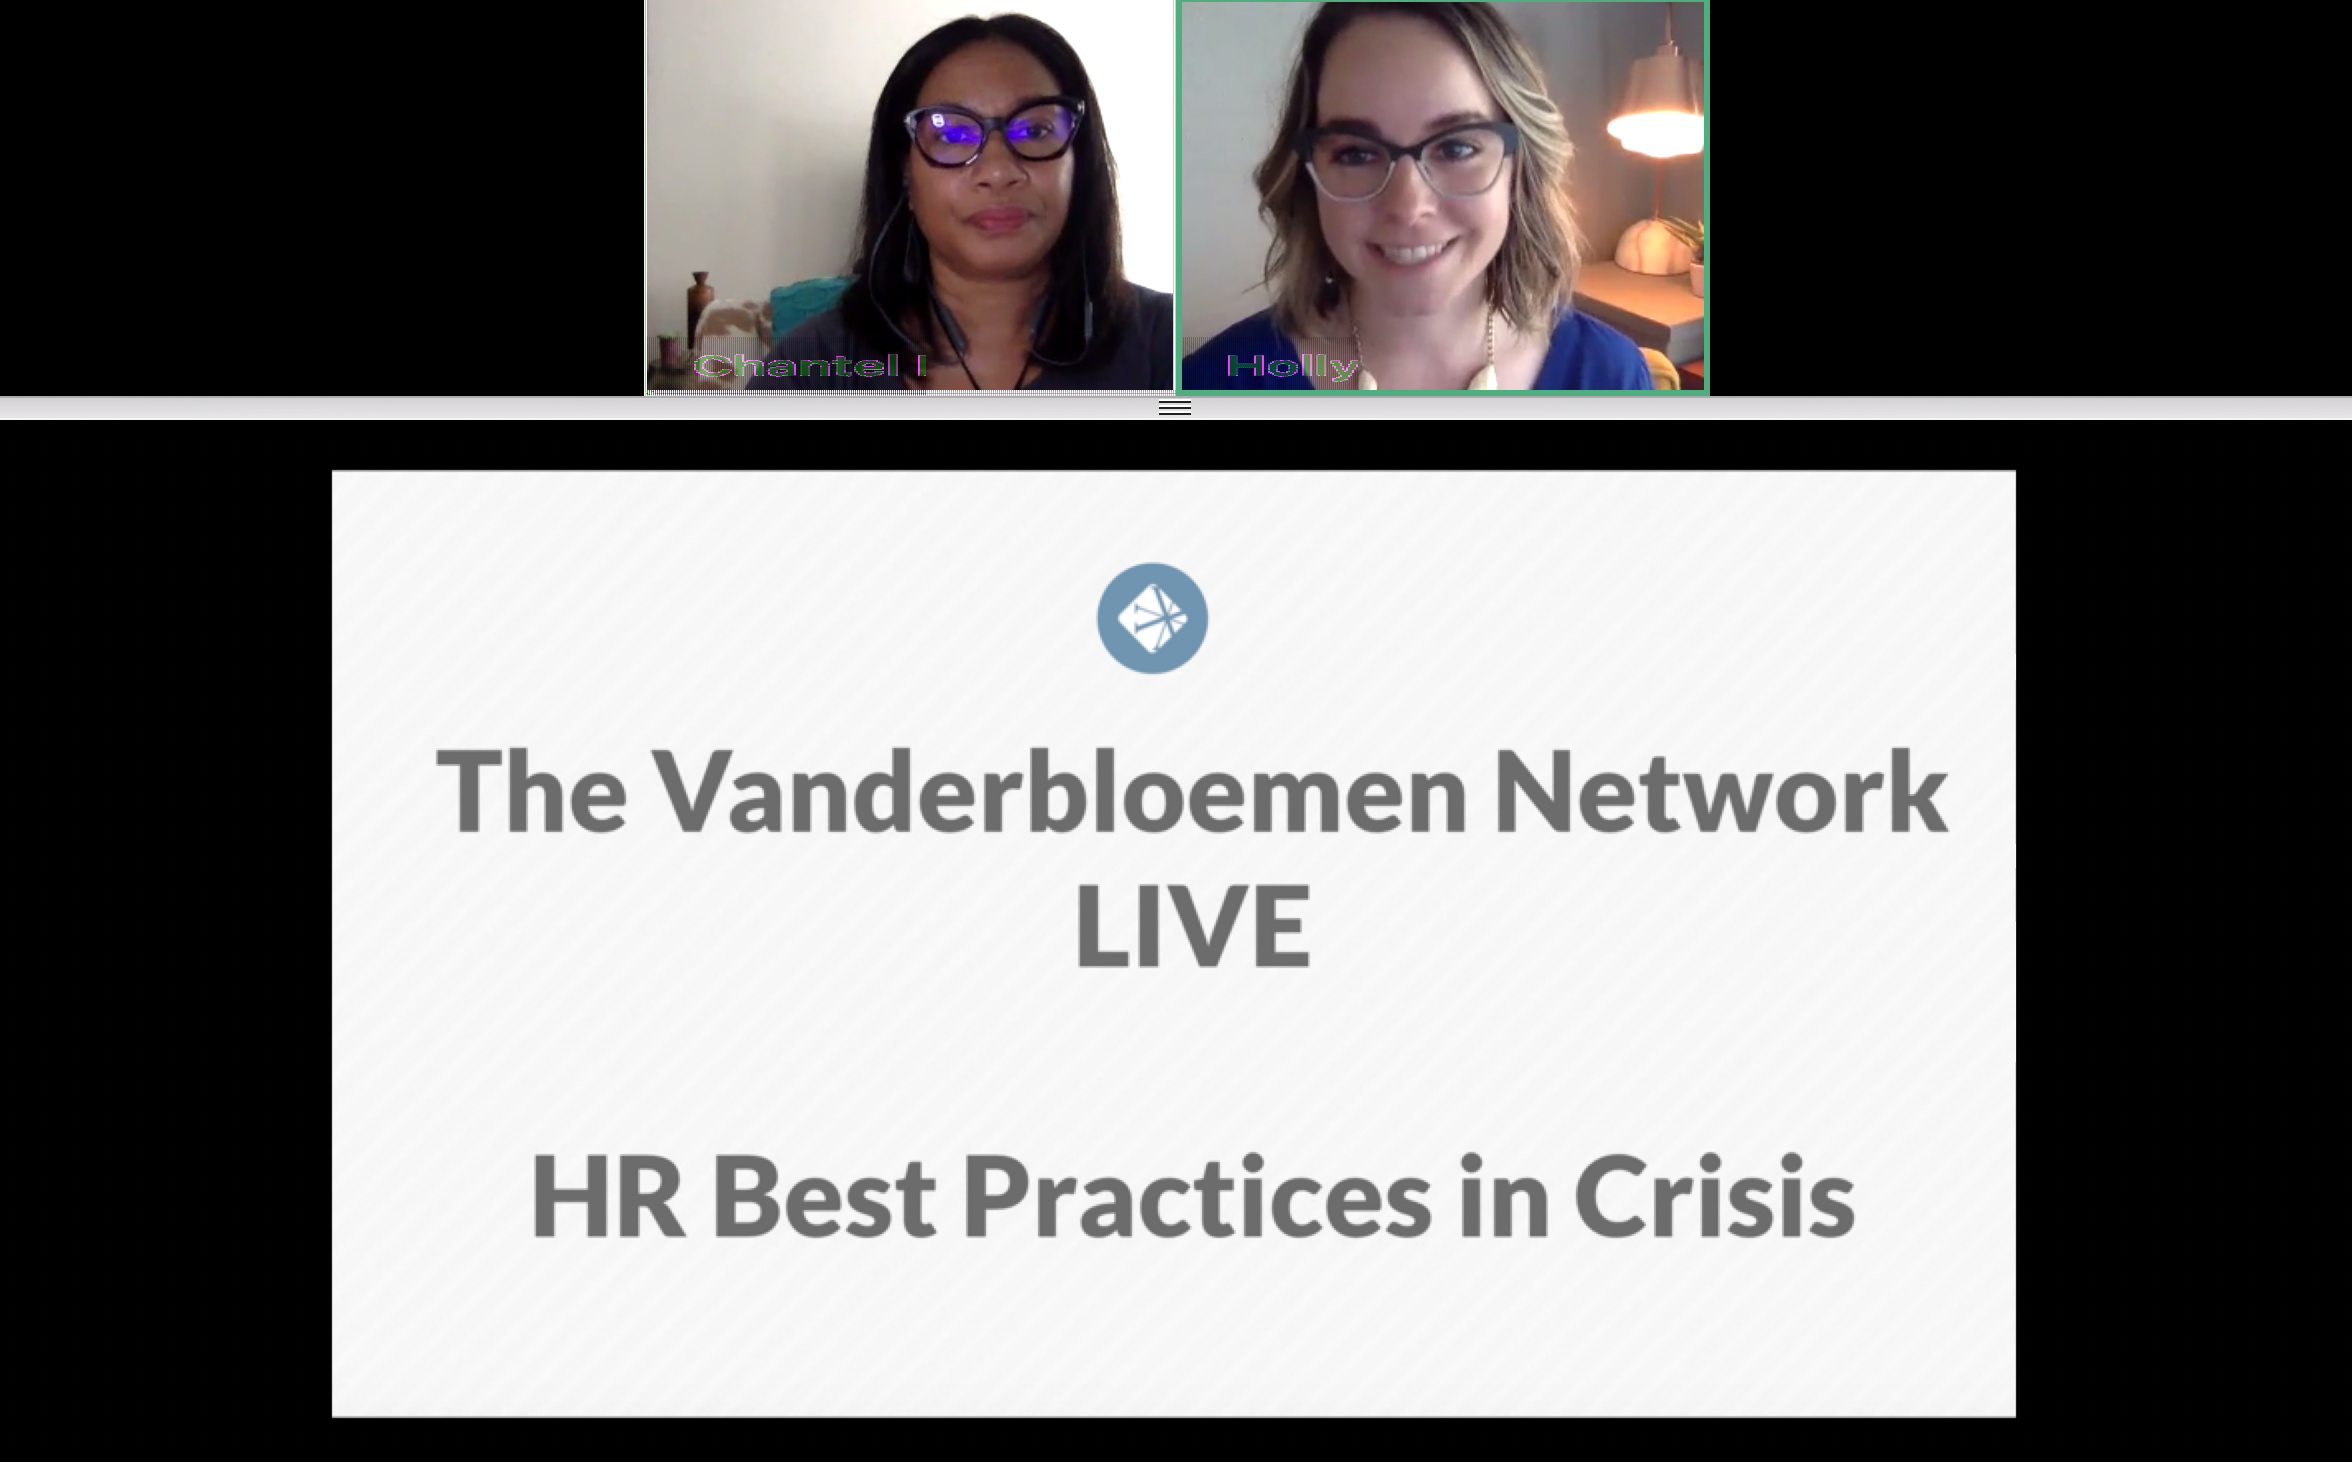 HR Best Practices in Crisis with Chantel McHenry